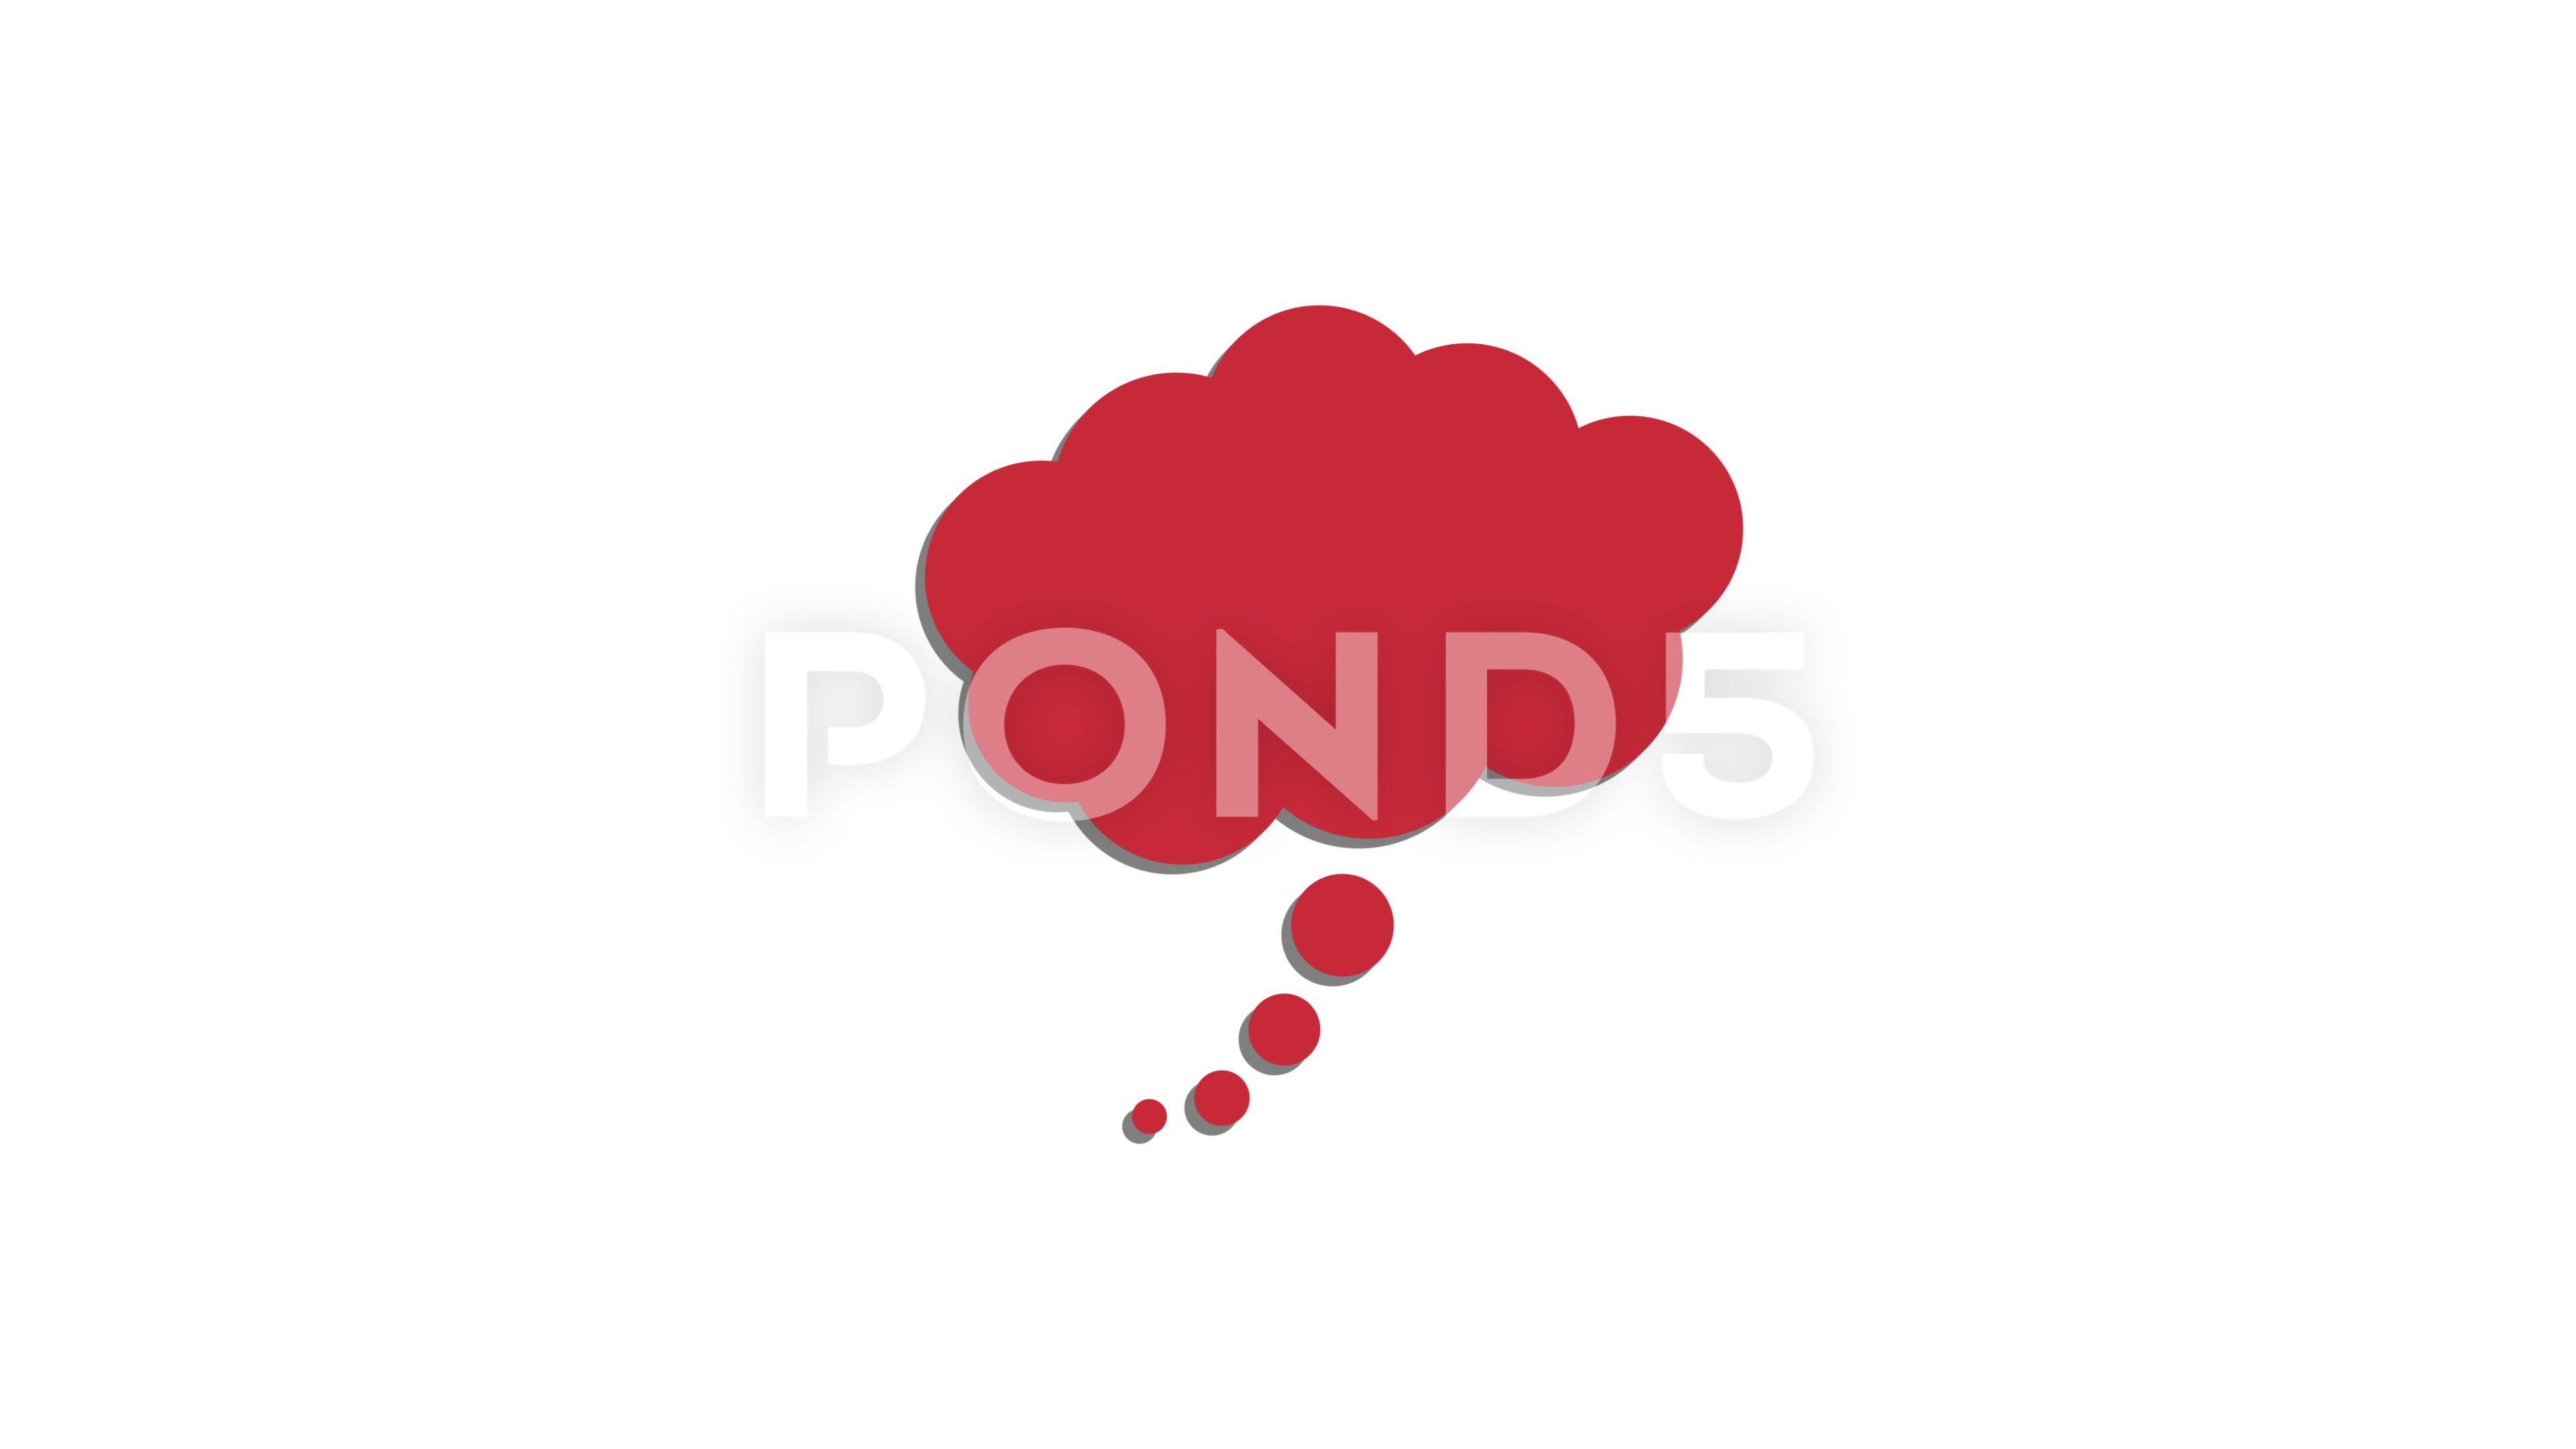 Red Thought Bubble Logo - Video: Thought bubble moving slow Animated icon Concept of thinking ...